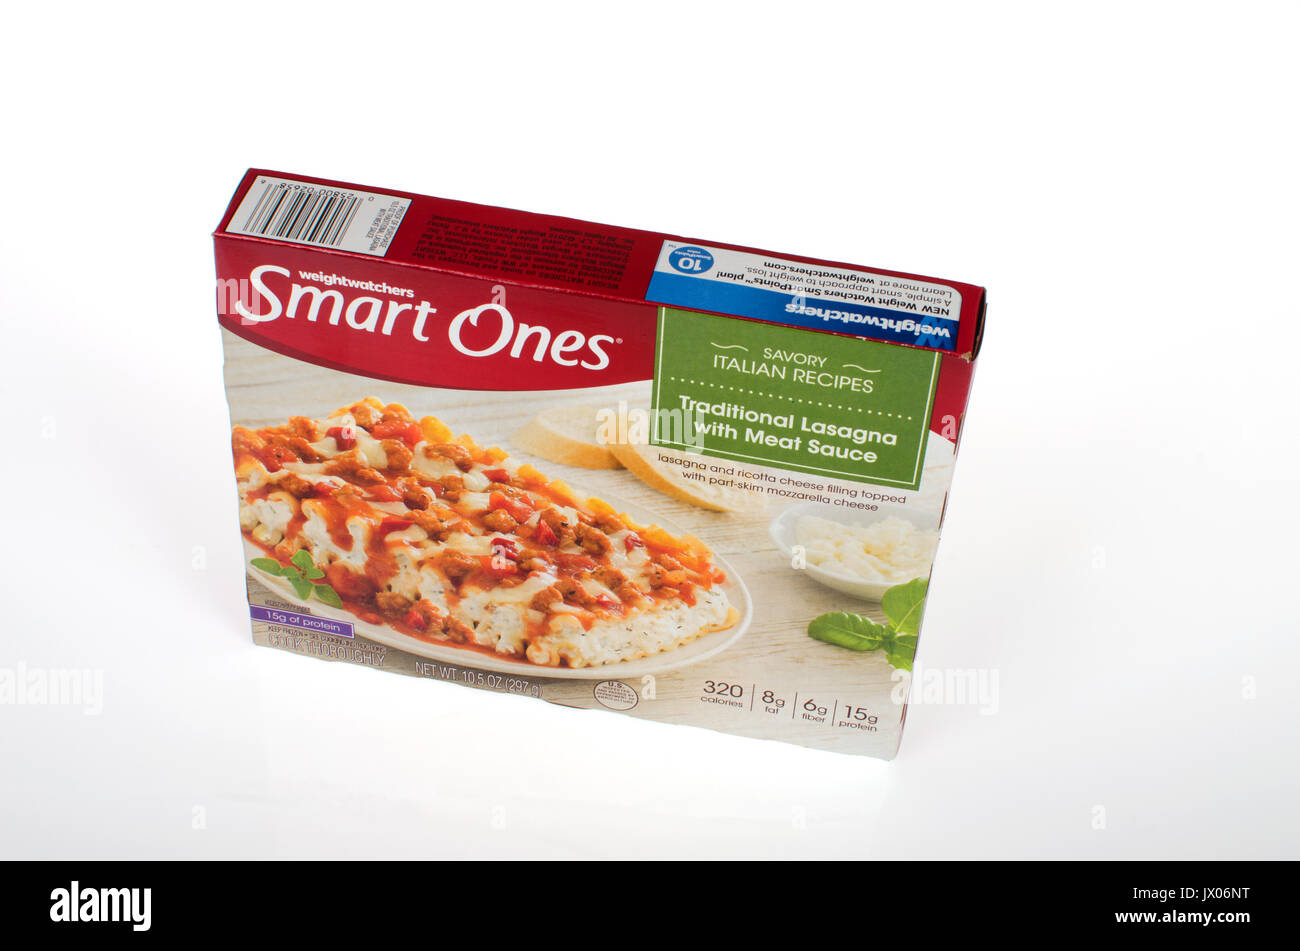 Unopend Box of frozen Weight Watchers Smart Ones entree Italian Savory Recipes traditional lasagna  recipe on white backgroud, cut out. USA Stock Photo